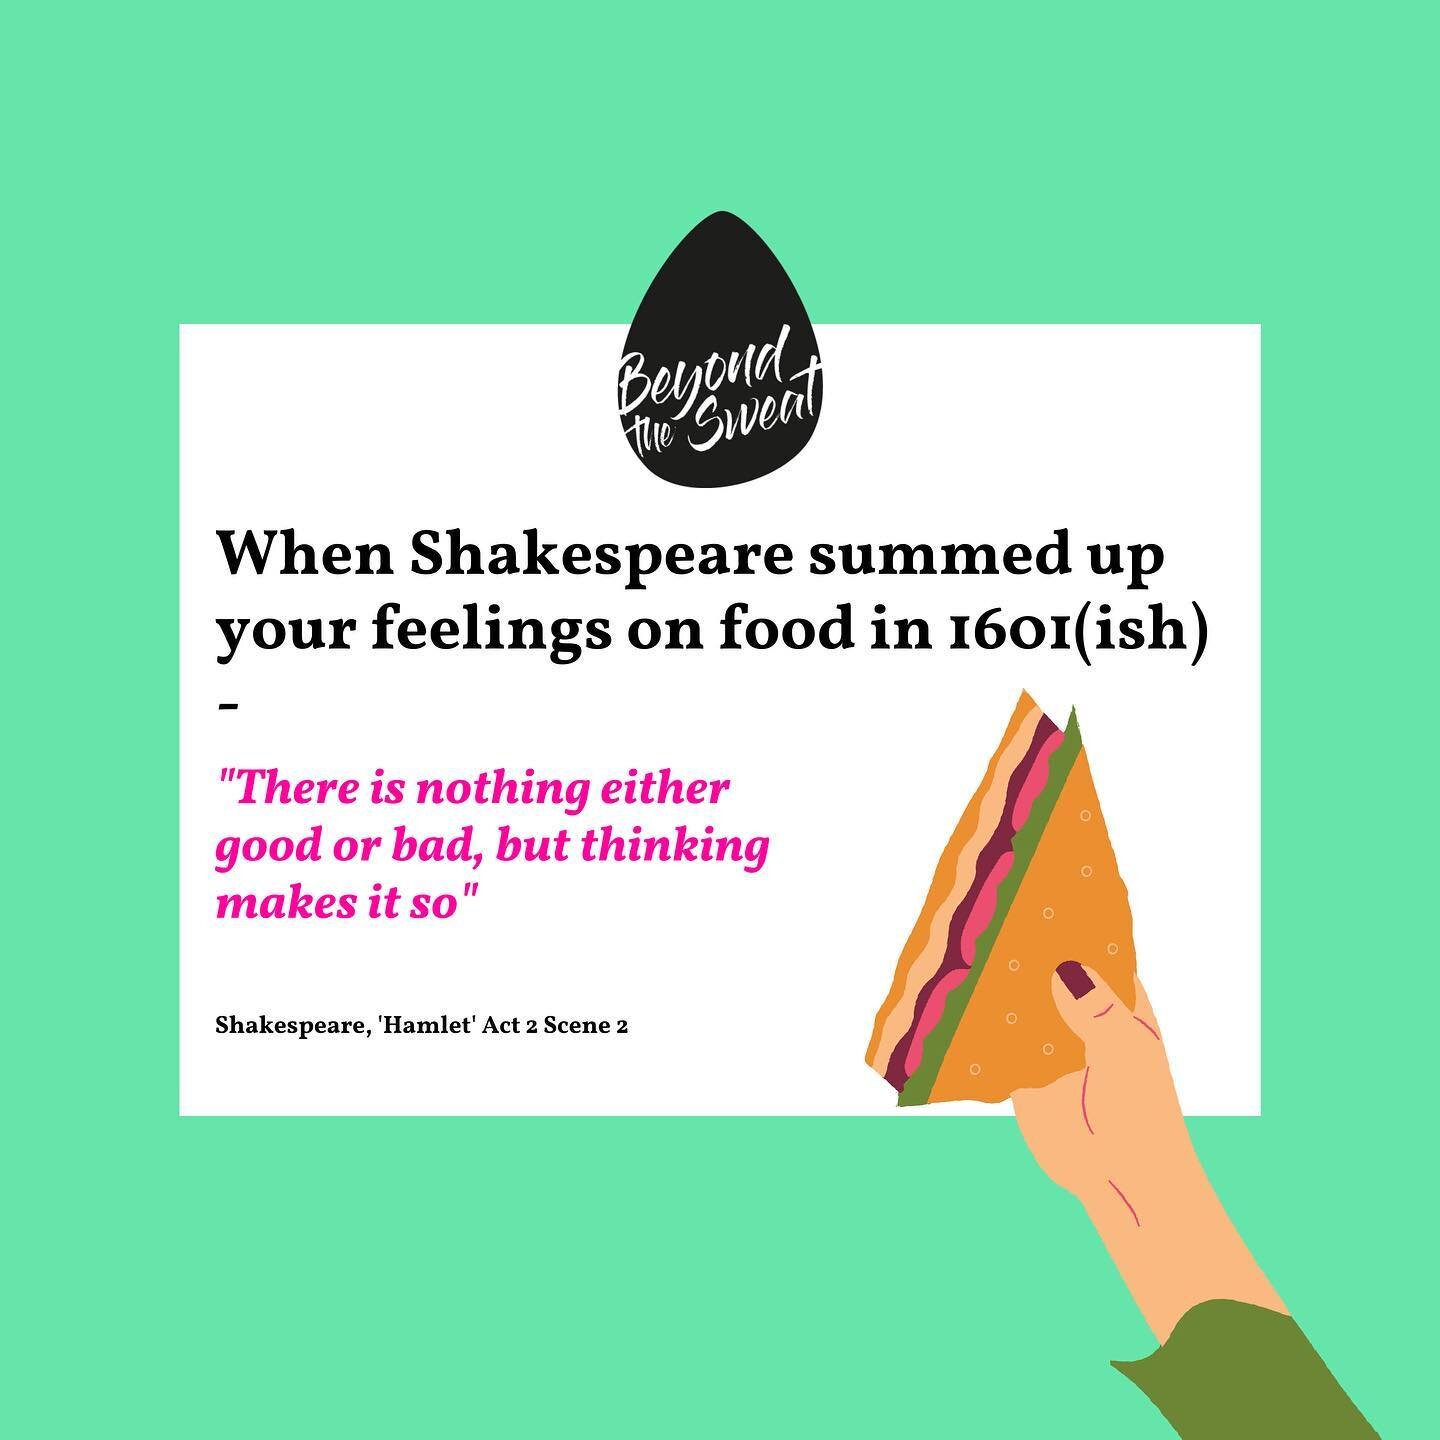 There are times to get creative with your words, and there are times to admit that Shakespeare beat you to it and said it better.

Now, Hamlet wasn't too worried about nutrition when he said this - he was a little more concerned with murders and spie